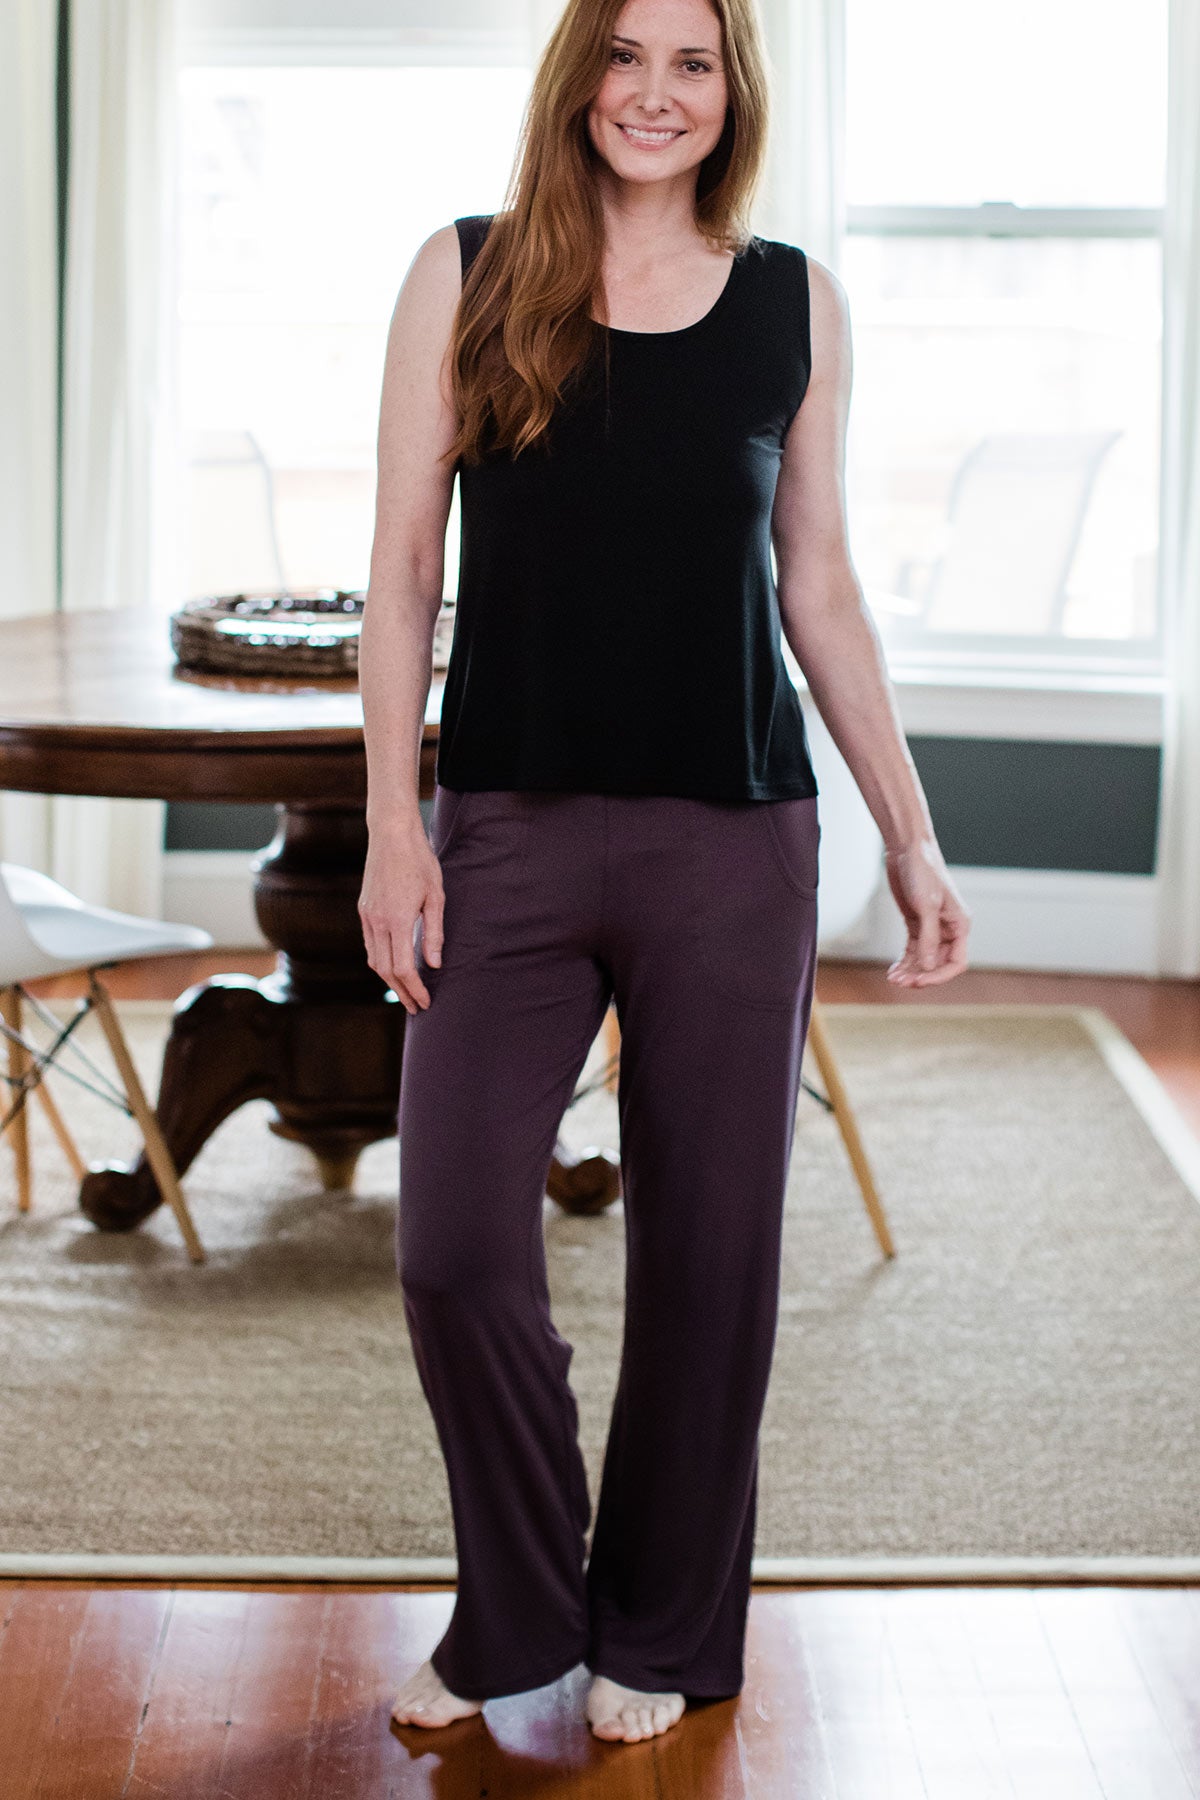 A woman standing and smiling with one knee bent to the side, wearing Yala Kayla Wide Leg Foldover Waist Bamboo Pants in Mink